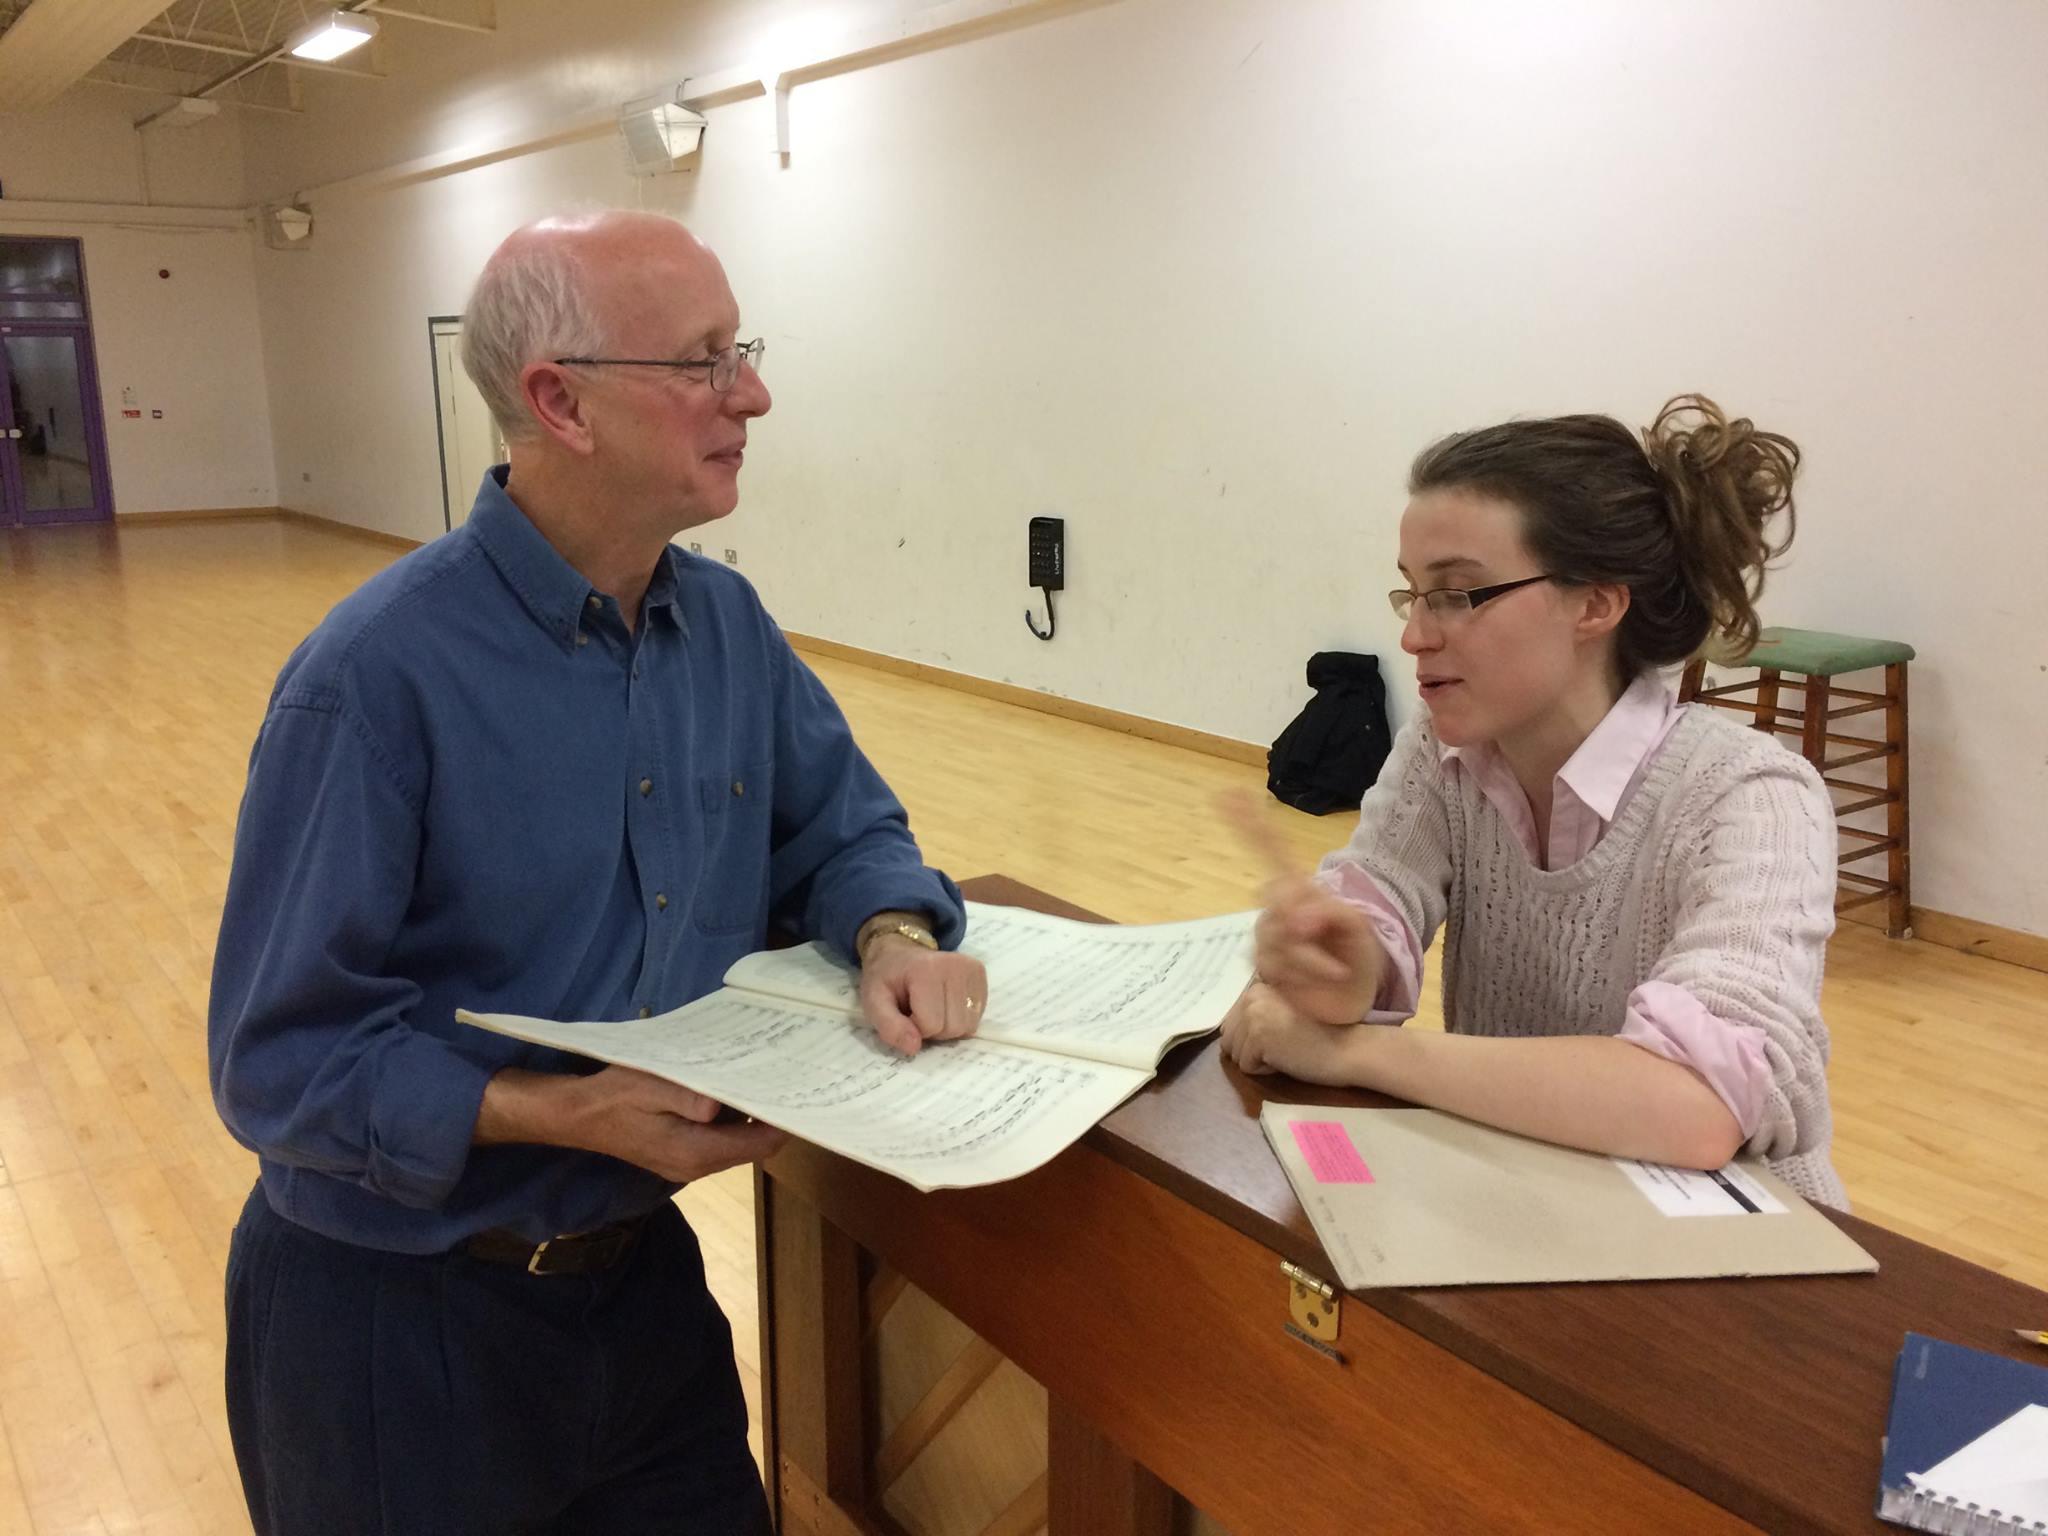 Andrew Lowen in discussion with soloist Katherine Tinker